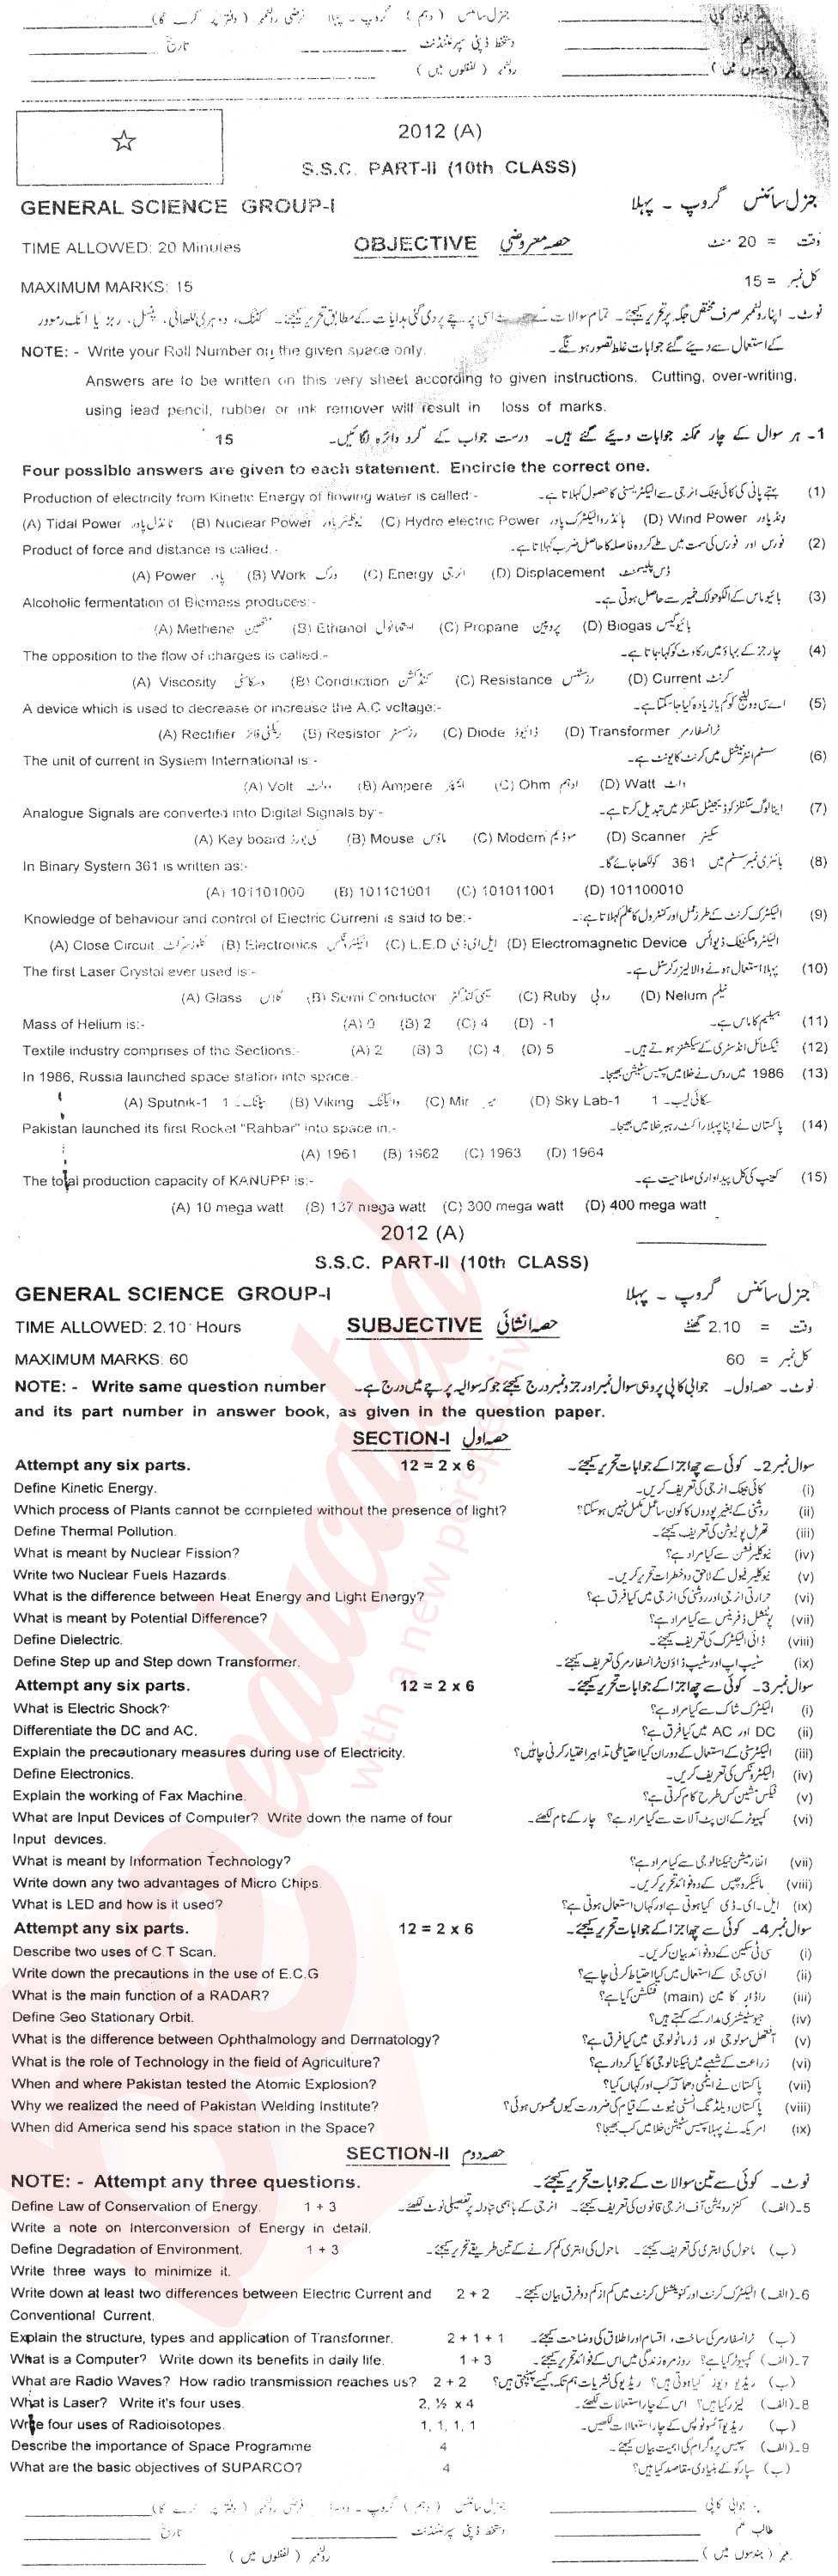 General Science 10th class Past Paper Group 1 BISE Multan 2012